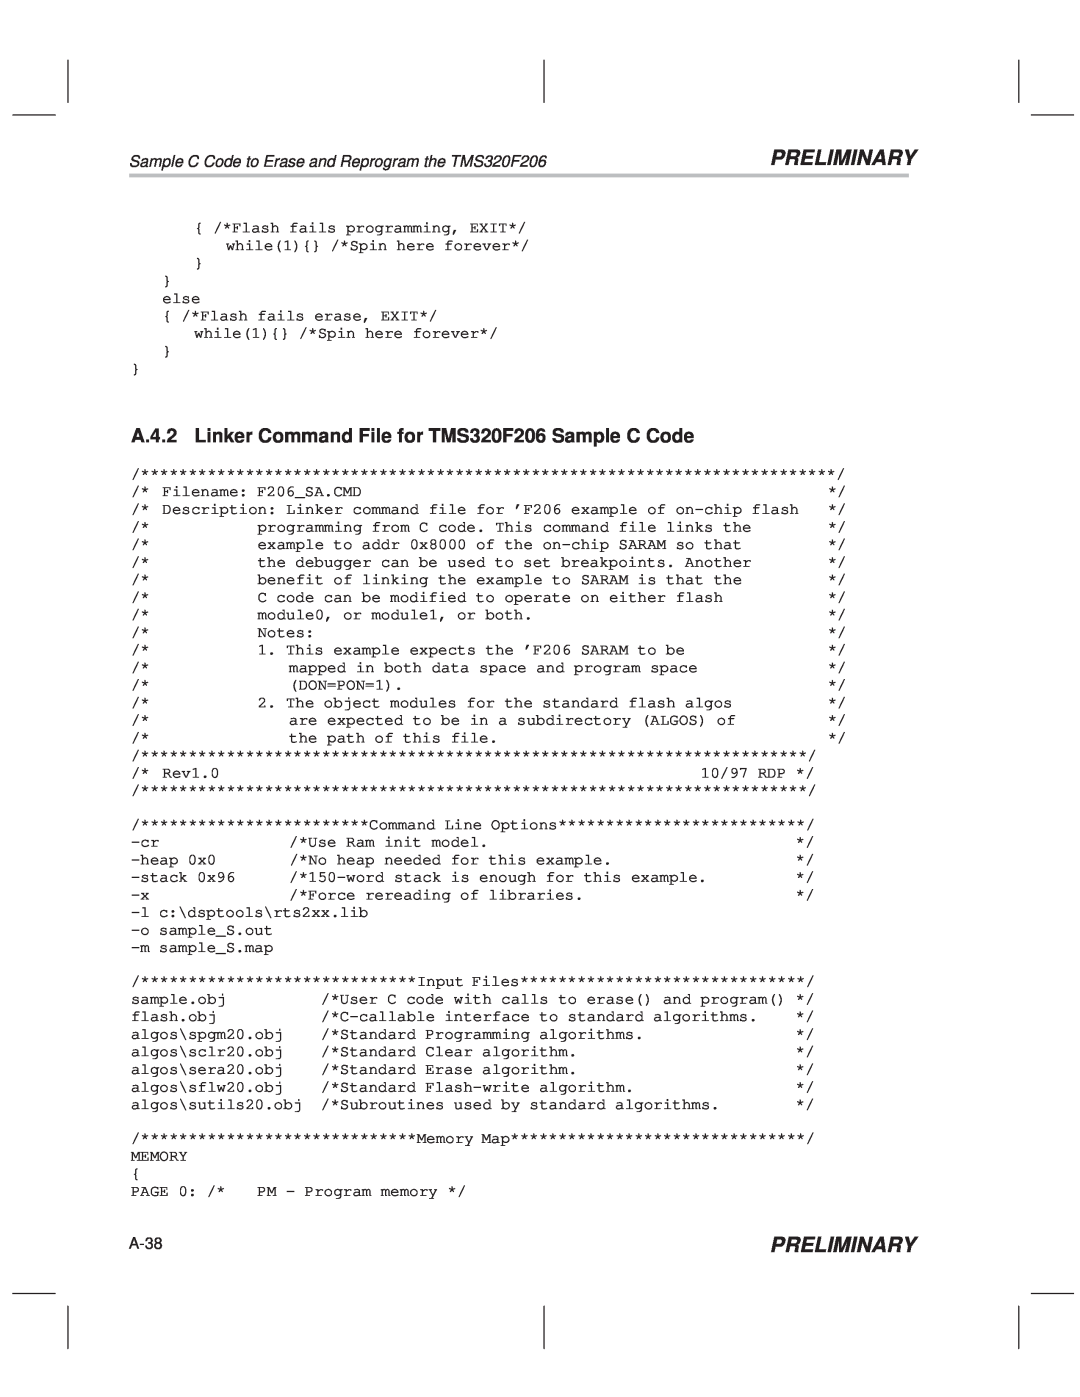 Texas Instruments TMS320F20x/F24x DSP manual A.4.2 Linker Command File for TMS320F206 Sample C Code, Preliminary, A-38 